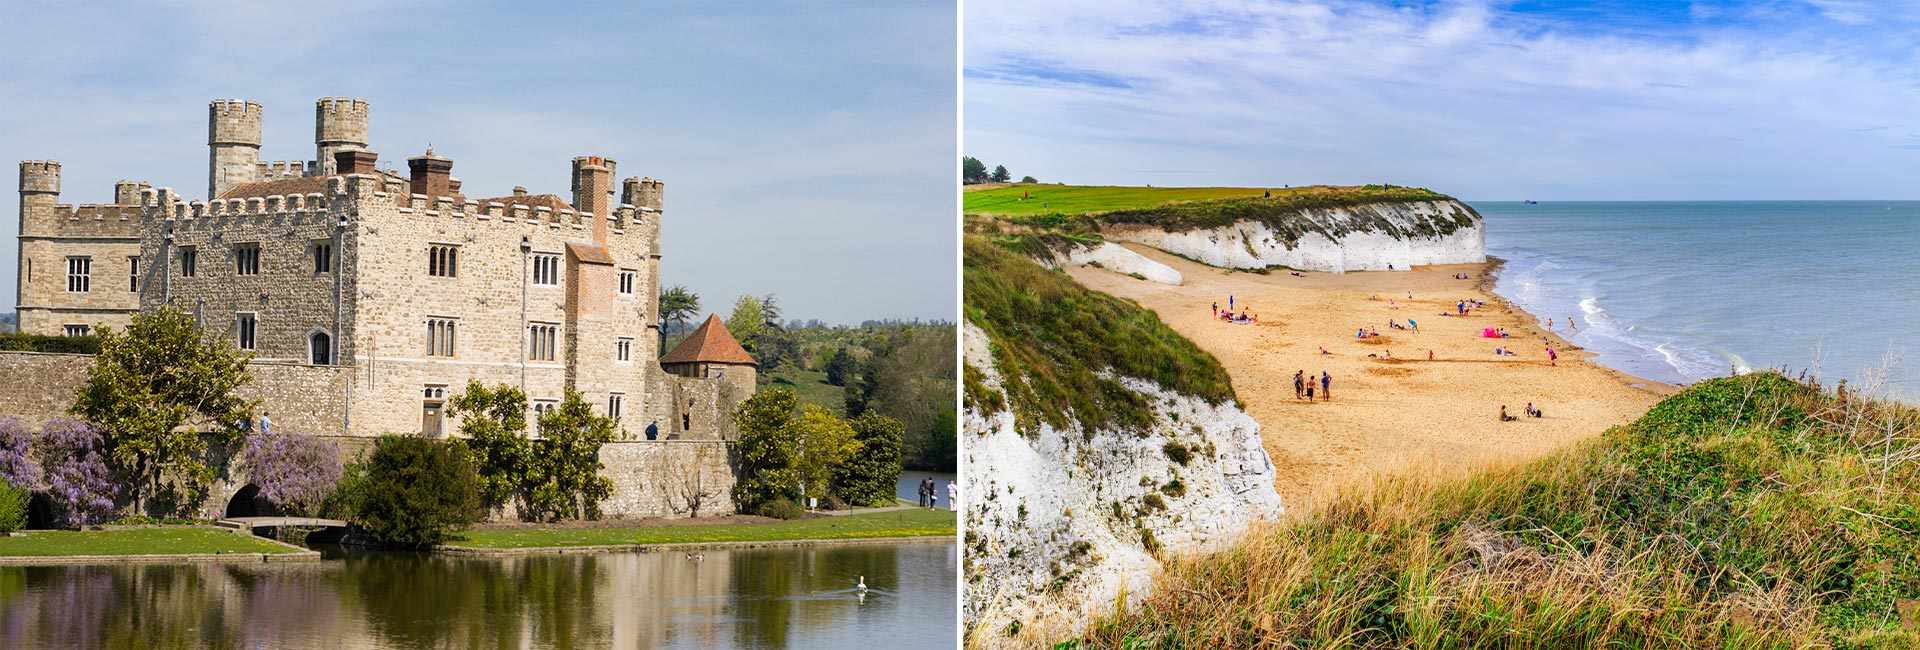 Things to do with the family in Kent | Berkeley Inspiration